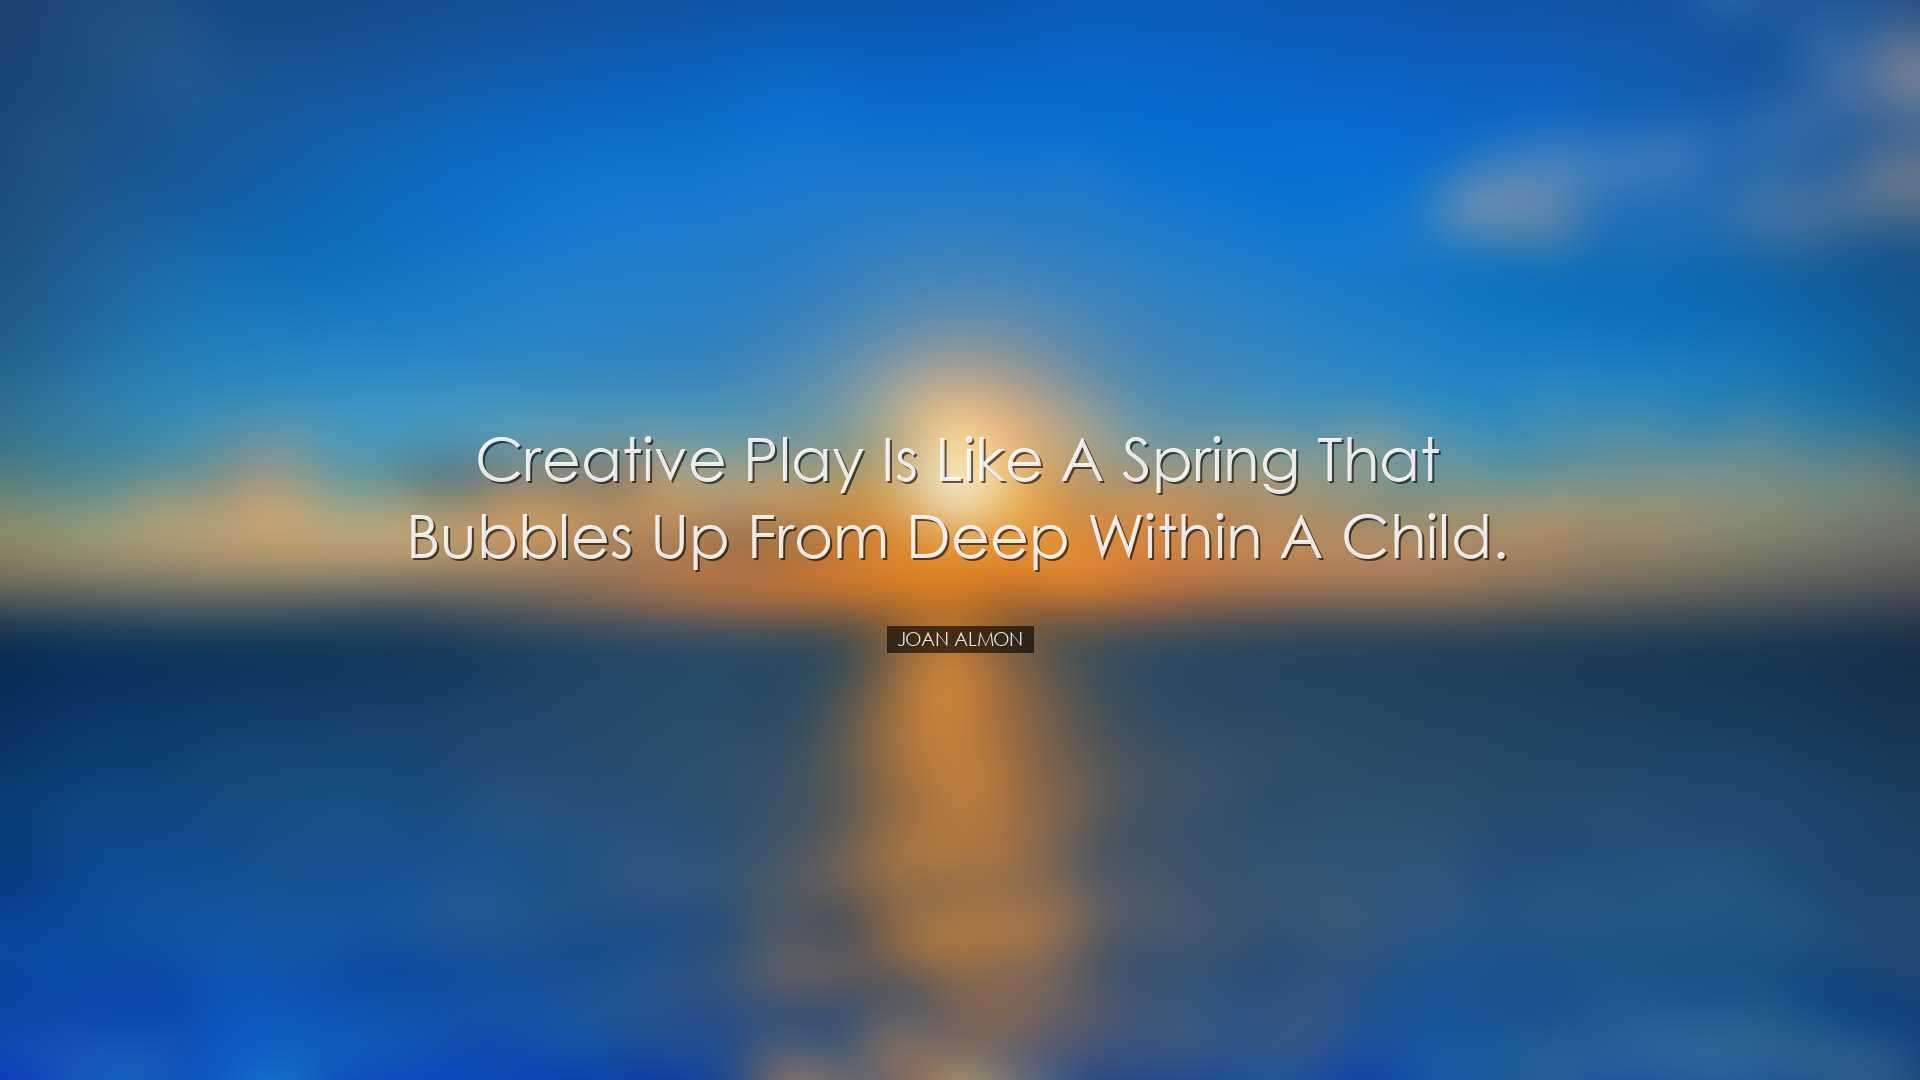 Creative play is like a spring that bubbles up from deep within a